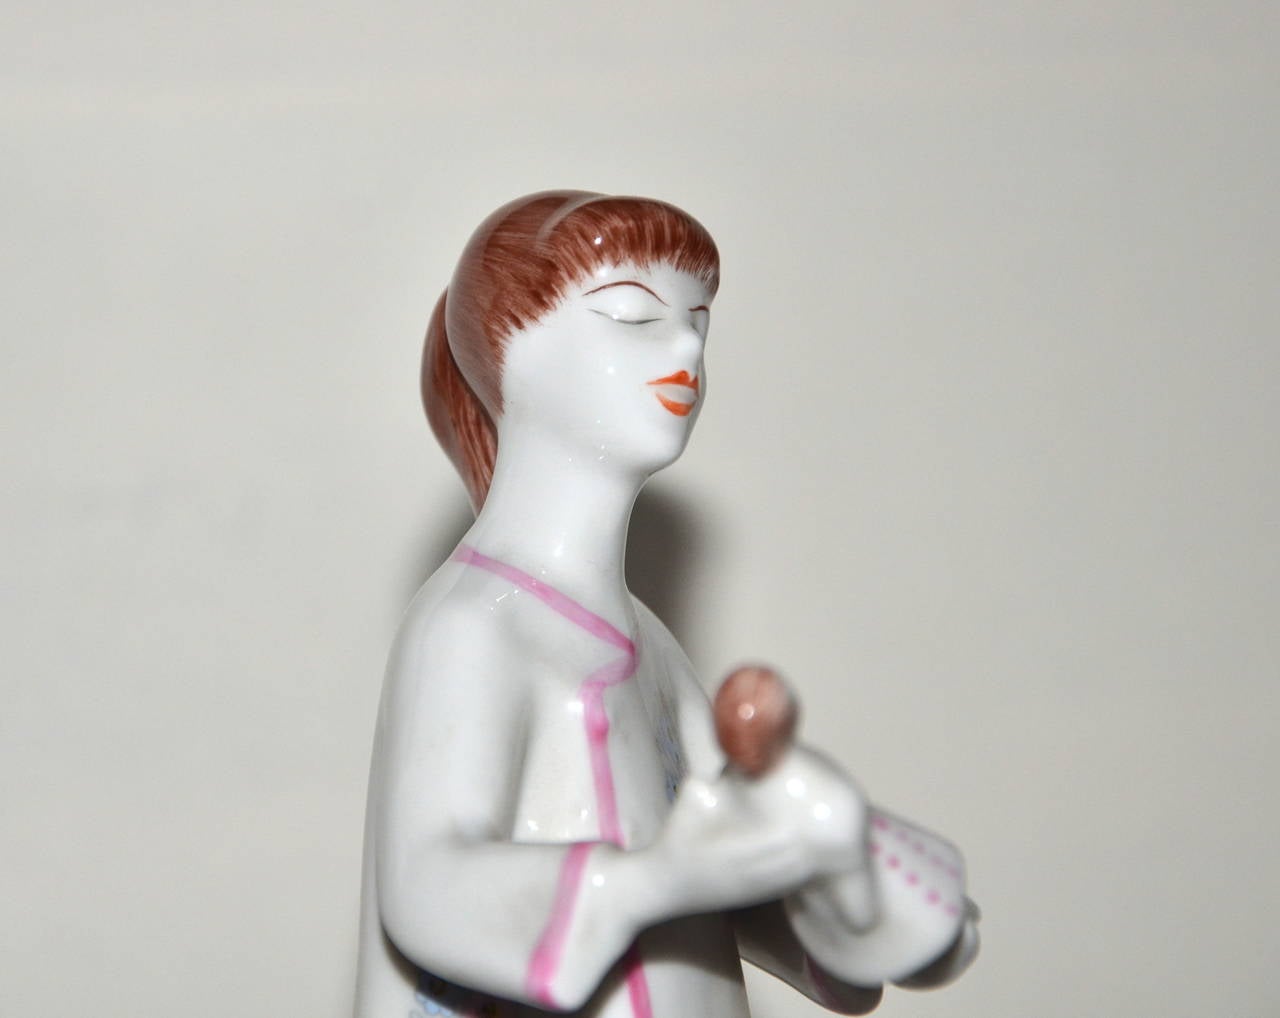 Mid-Century Modern ceramic sculpture, girl with doll, hand-painted ceramic, 1950s.